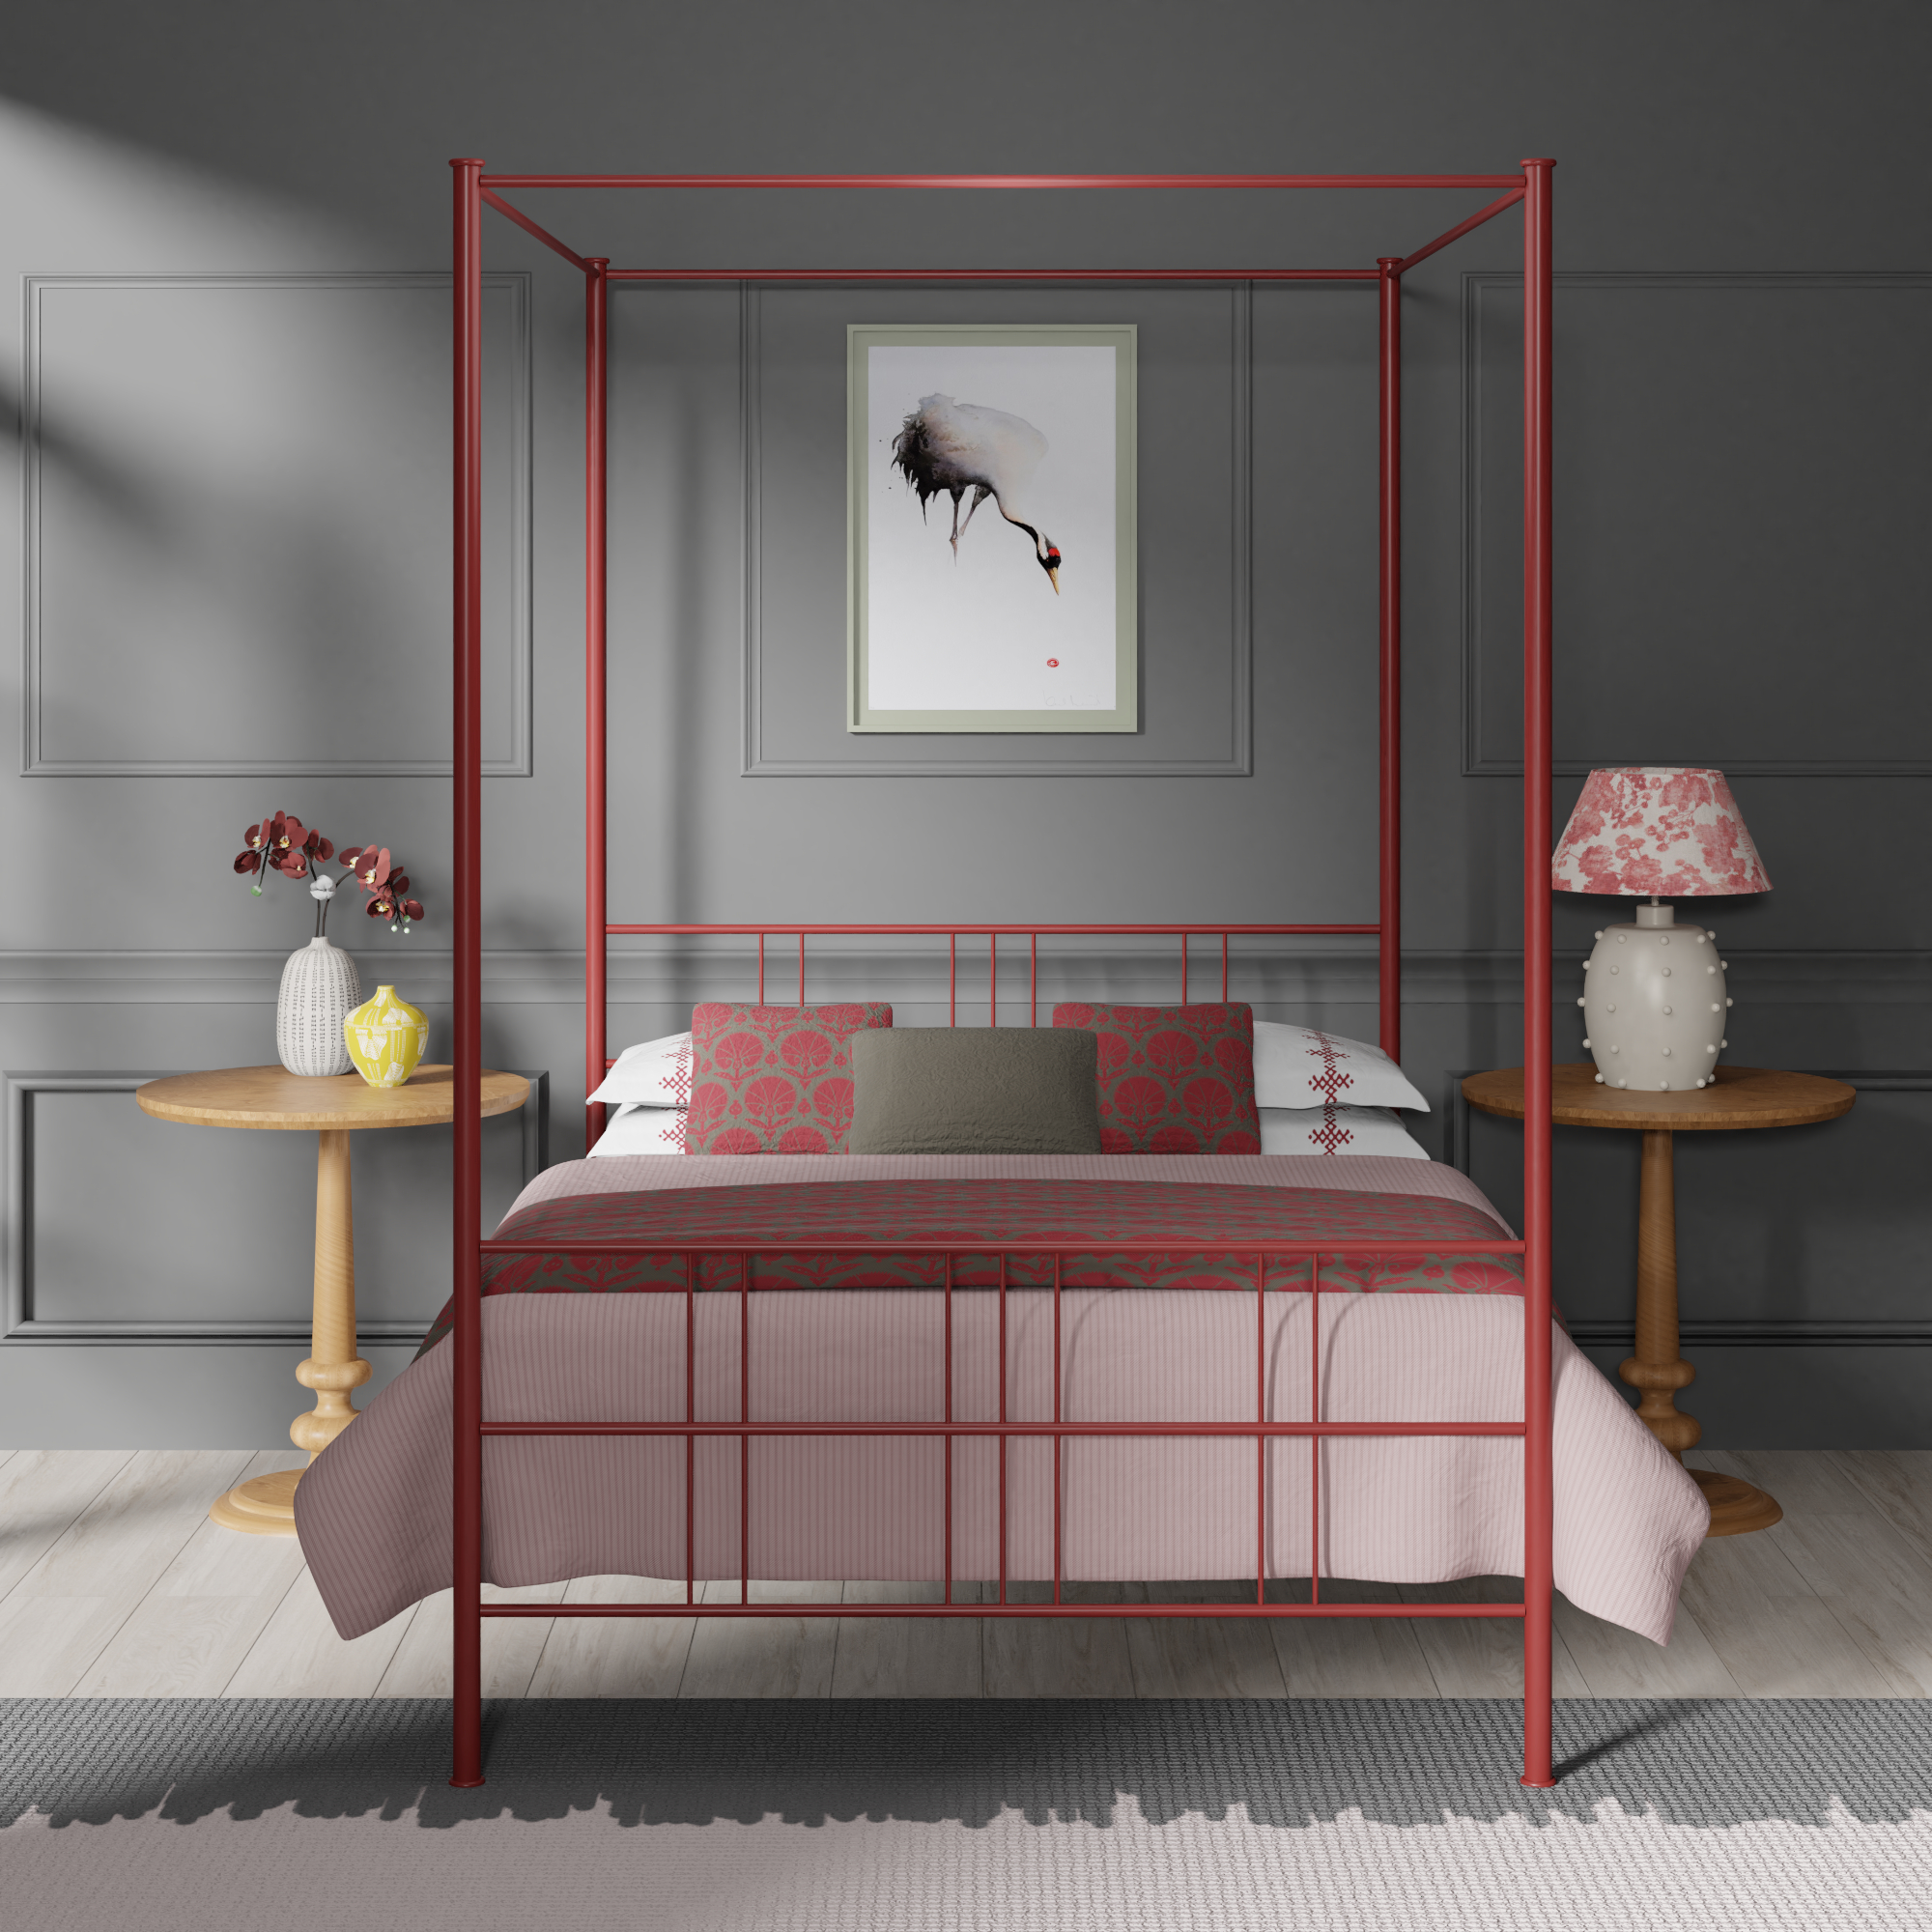 Toulon iron bed - Image red